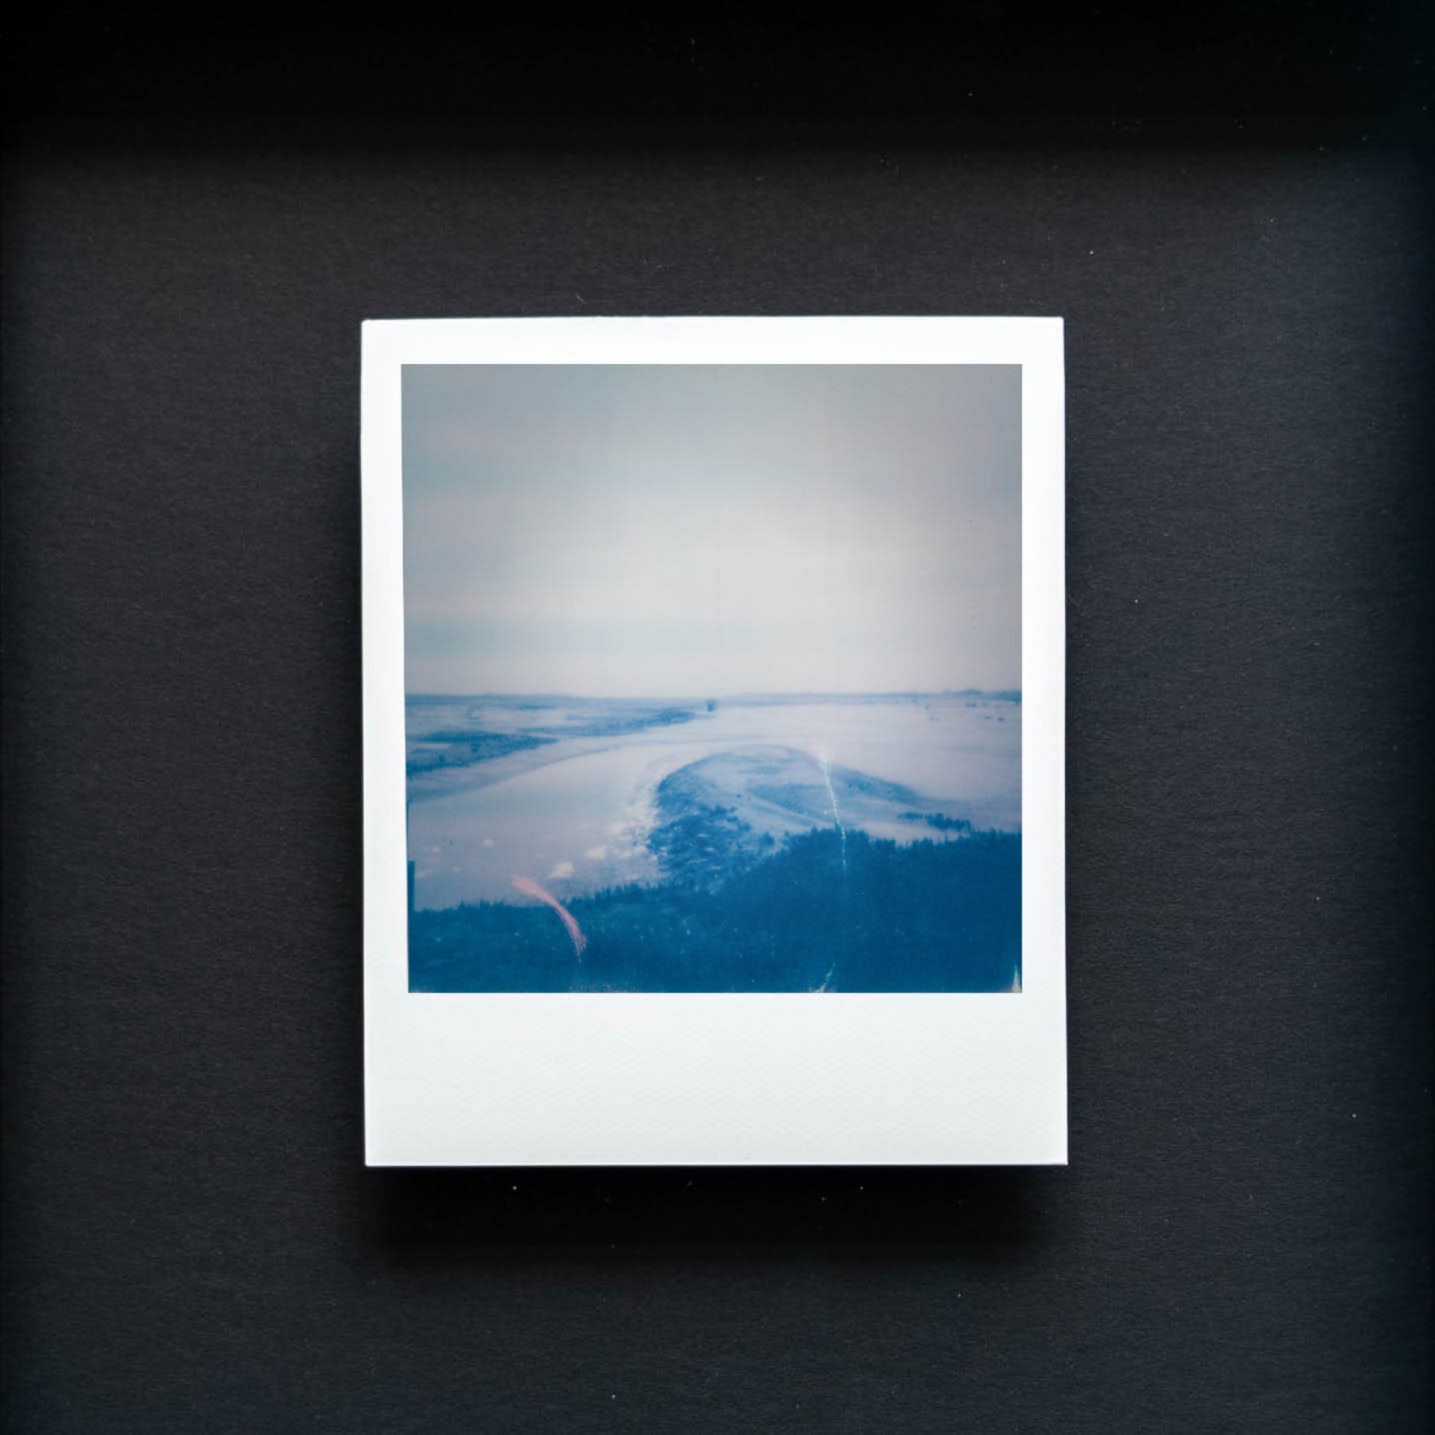 Where I Learn to Breathe: artifact 51.36333565438345, 3.3731487553688604. Framed Polaroid. Available on shopify.